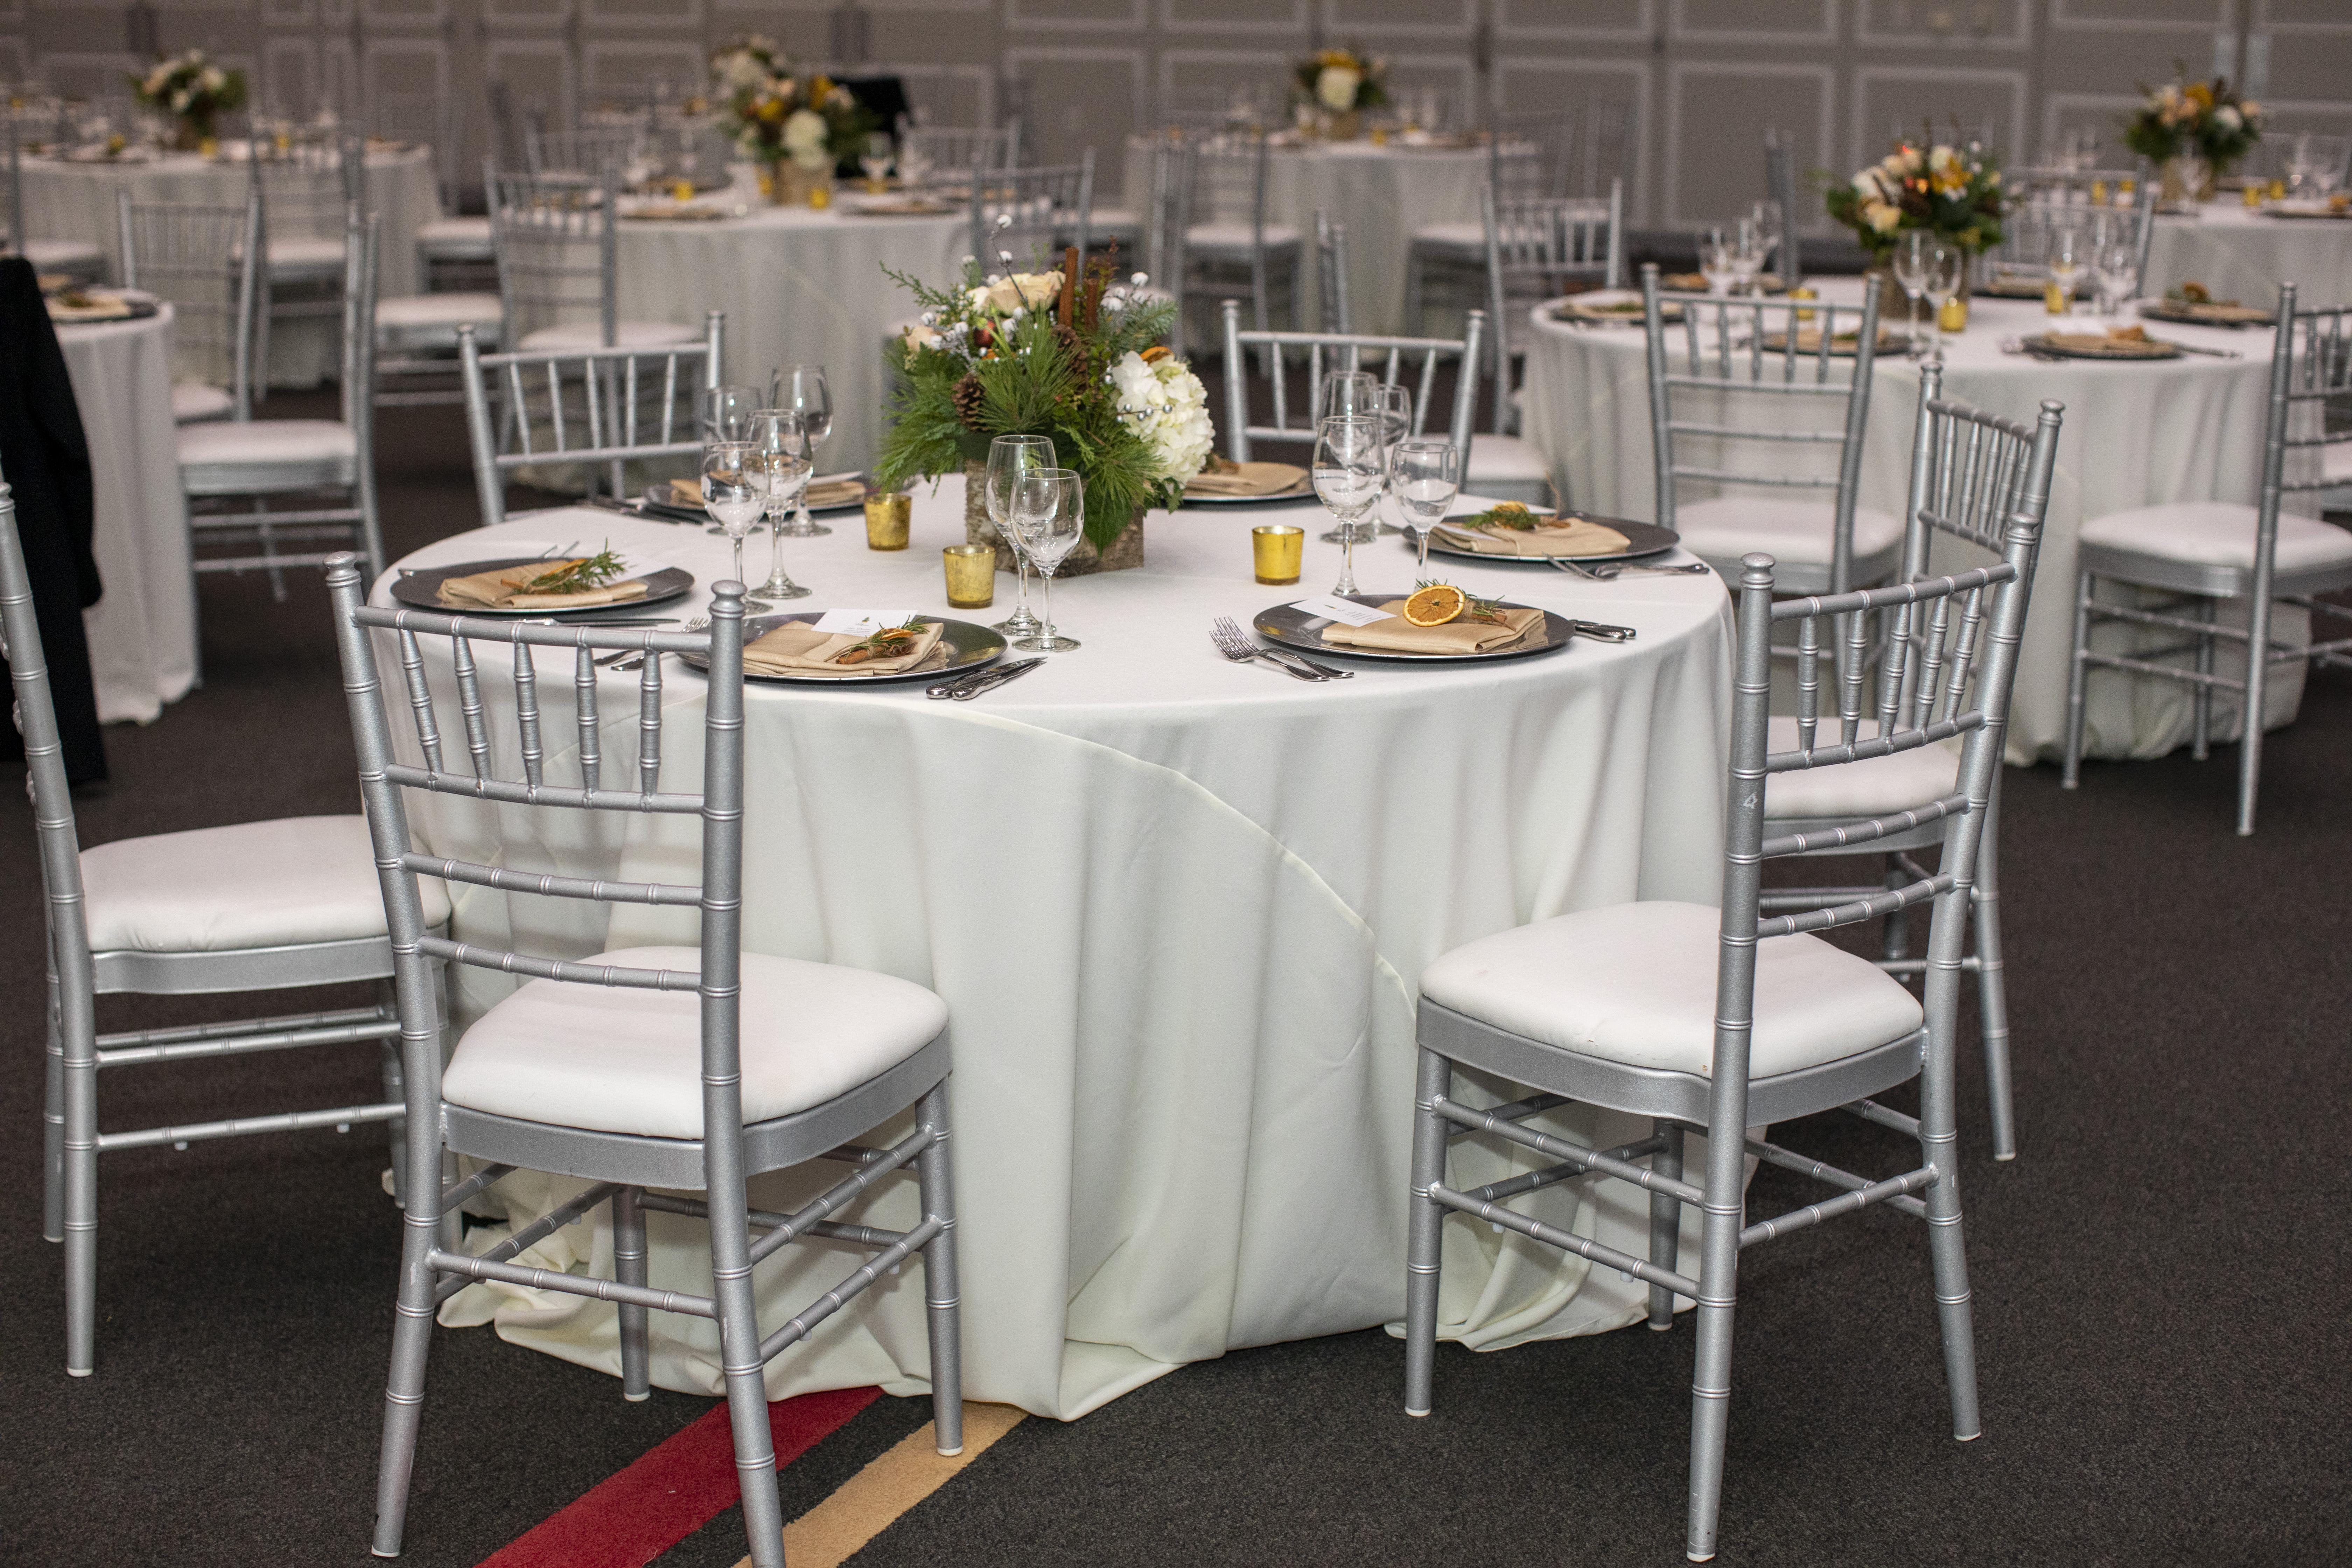 Banquet set with white linens